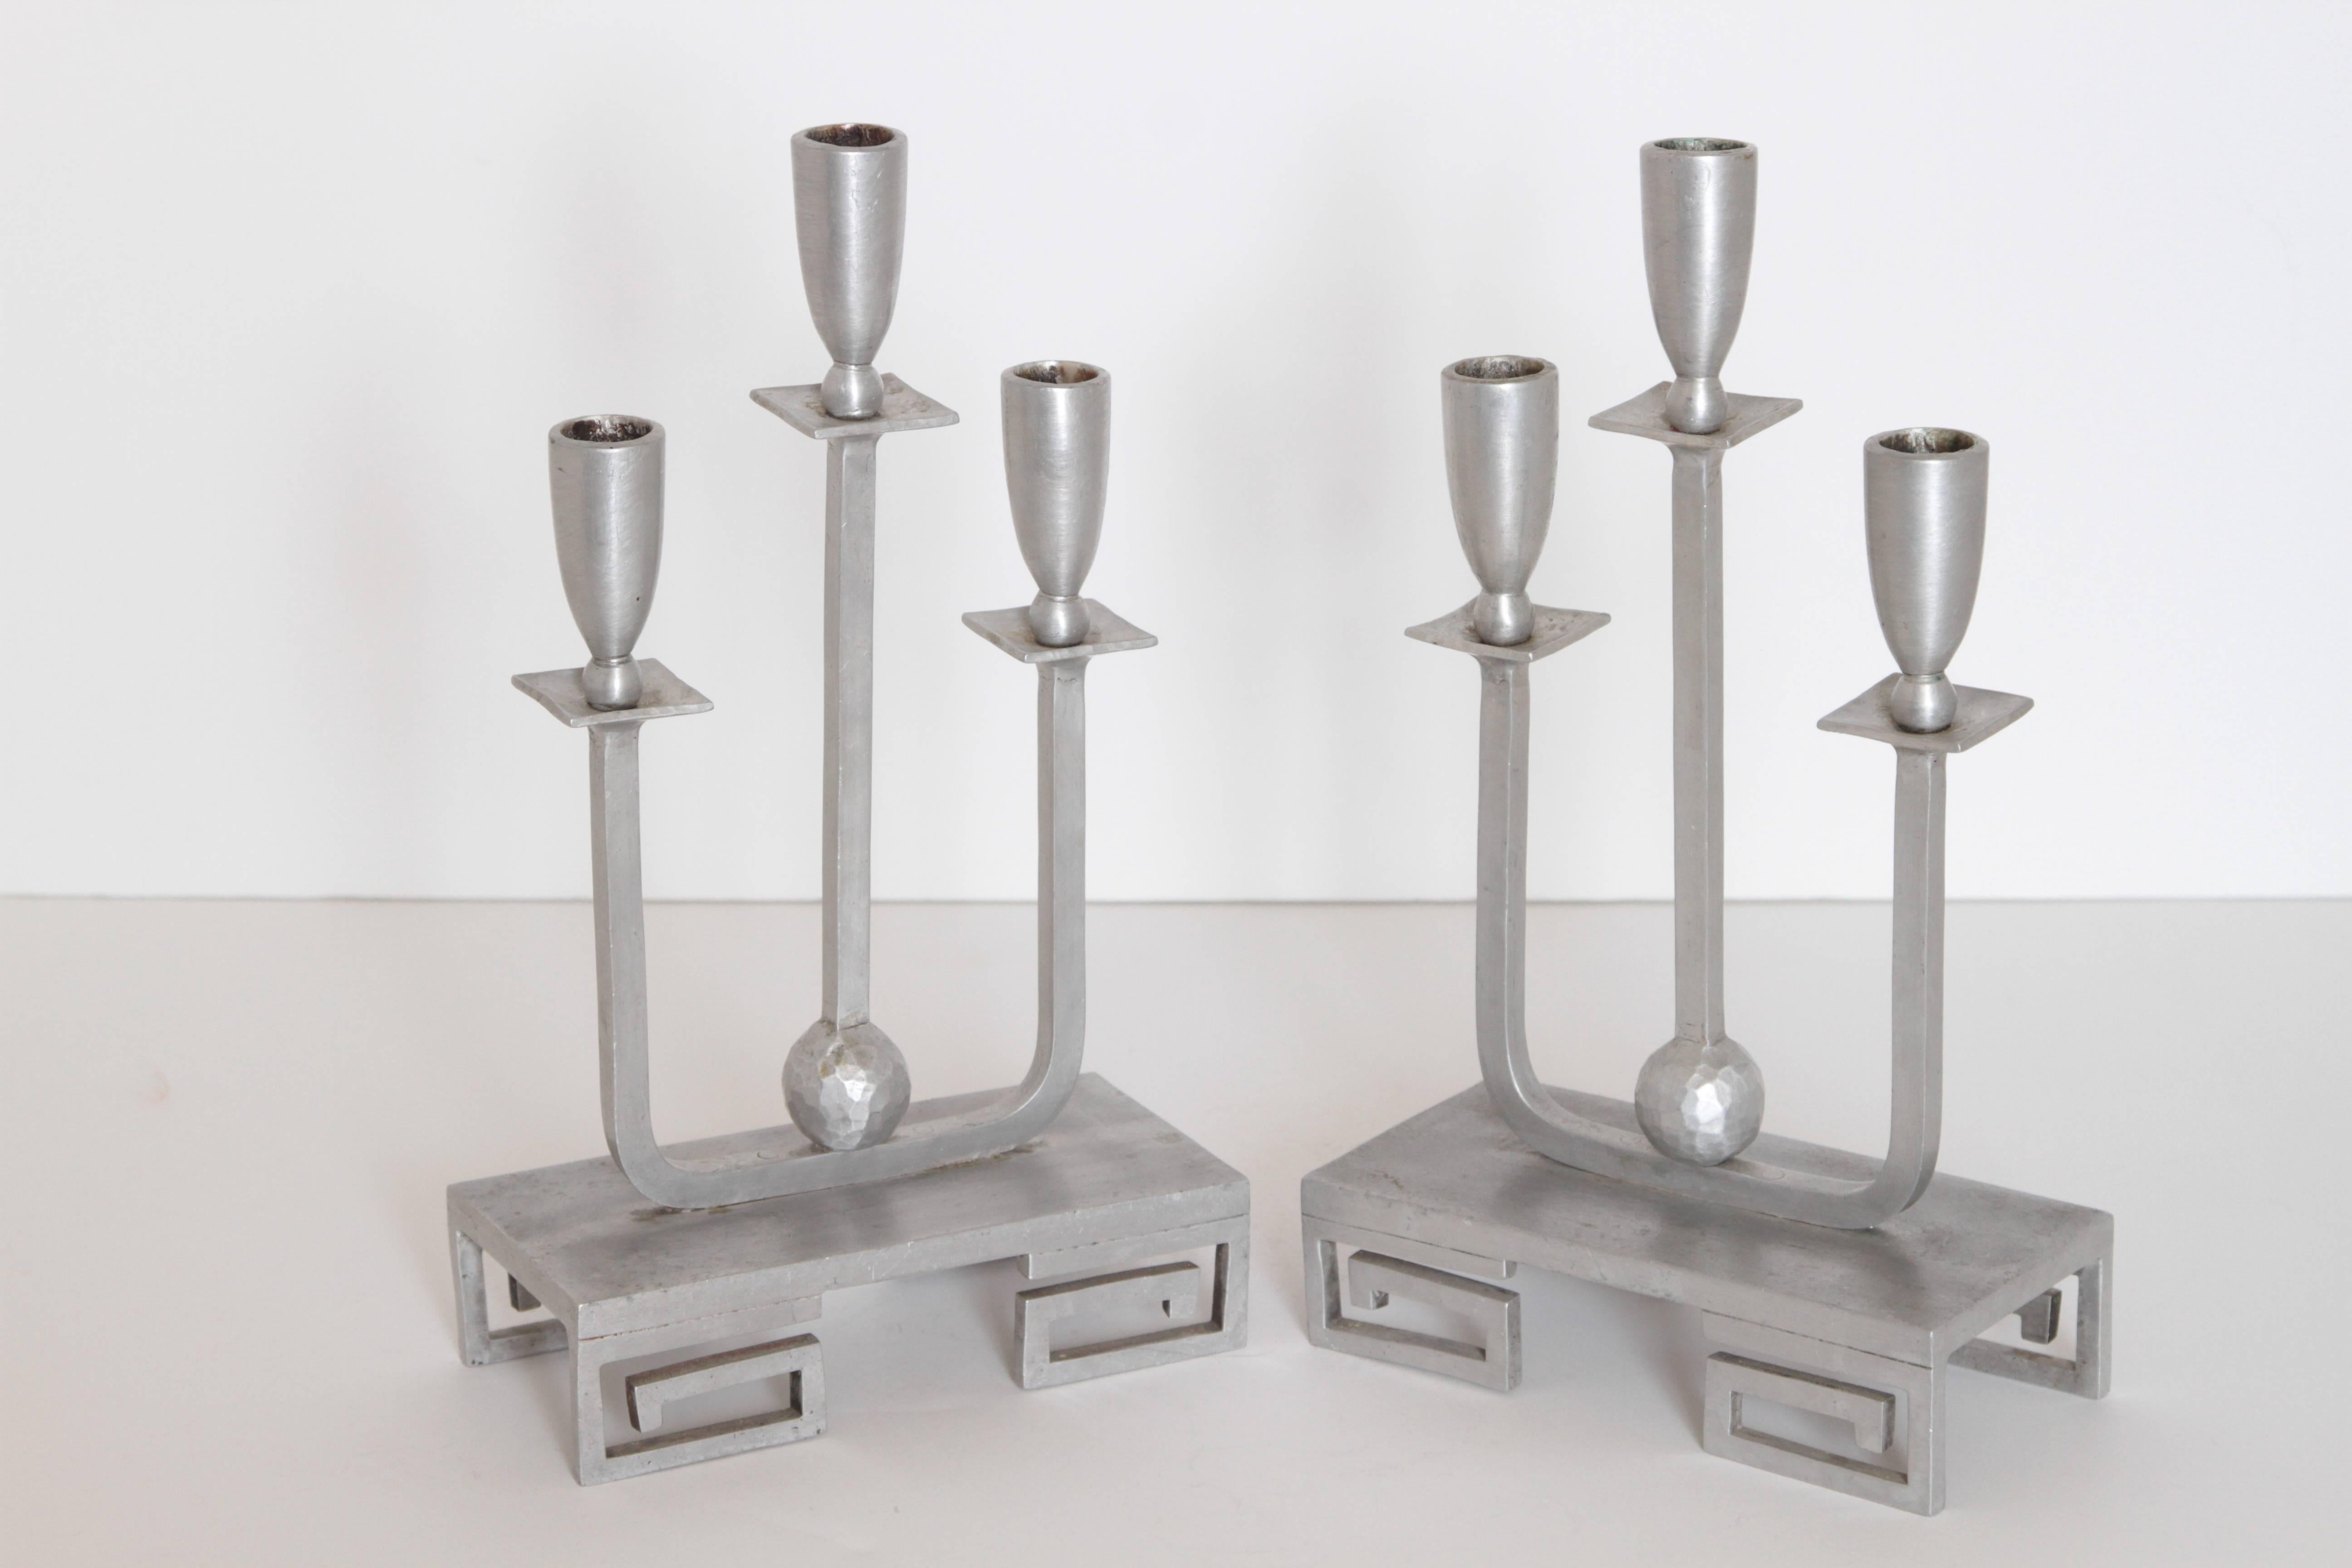 Hammered Machine Age Hand-Wrought Aluminium Palmer Smith Candlestick Holders, Two Pairs For Sale